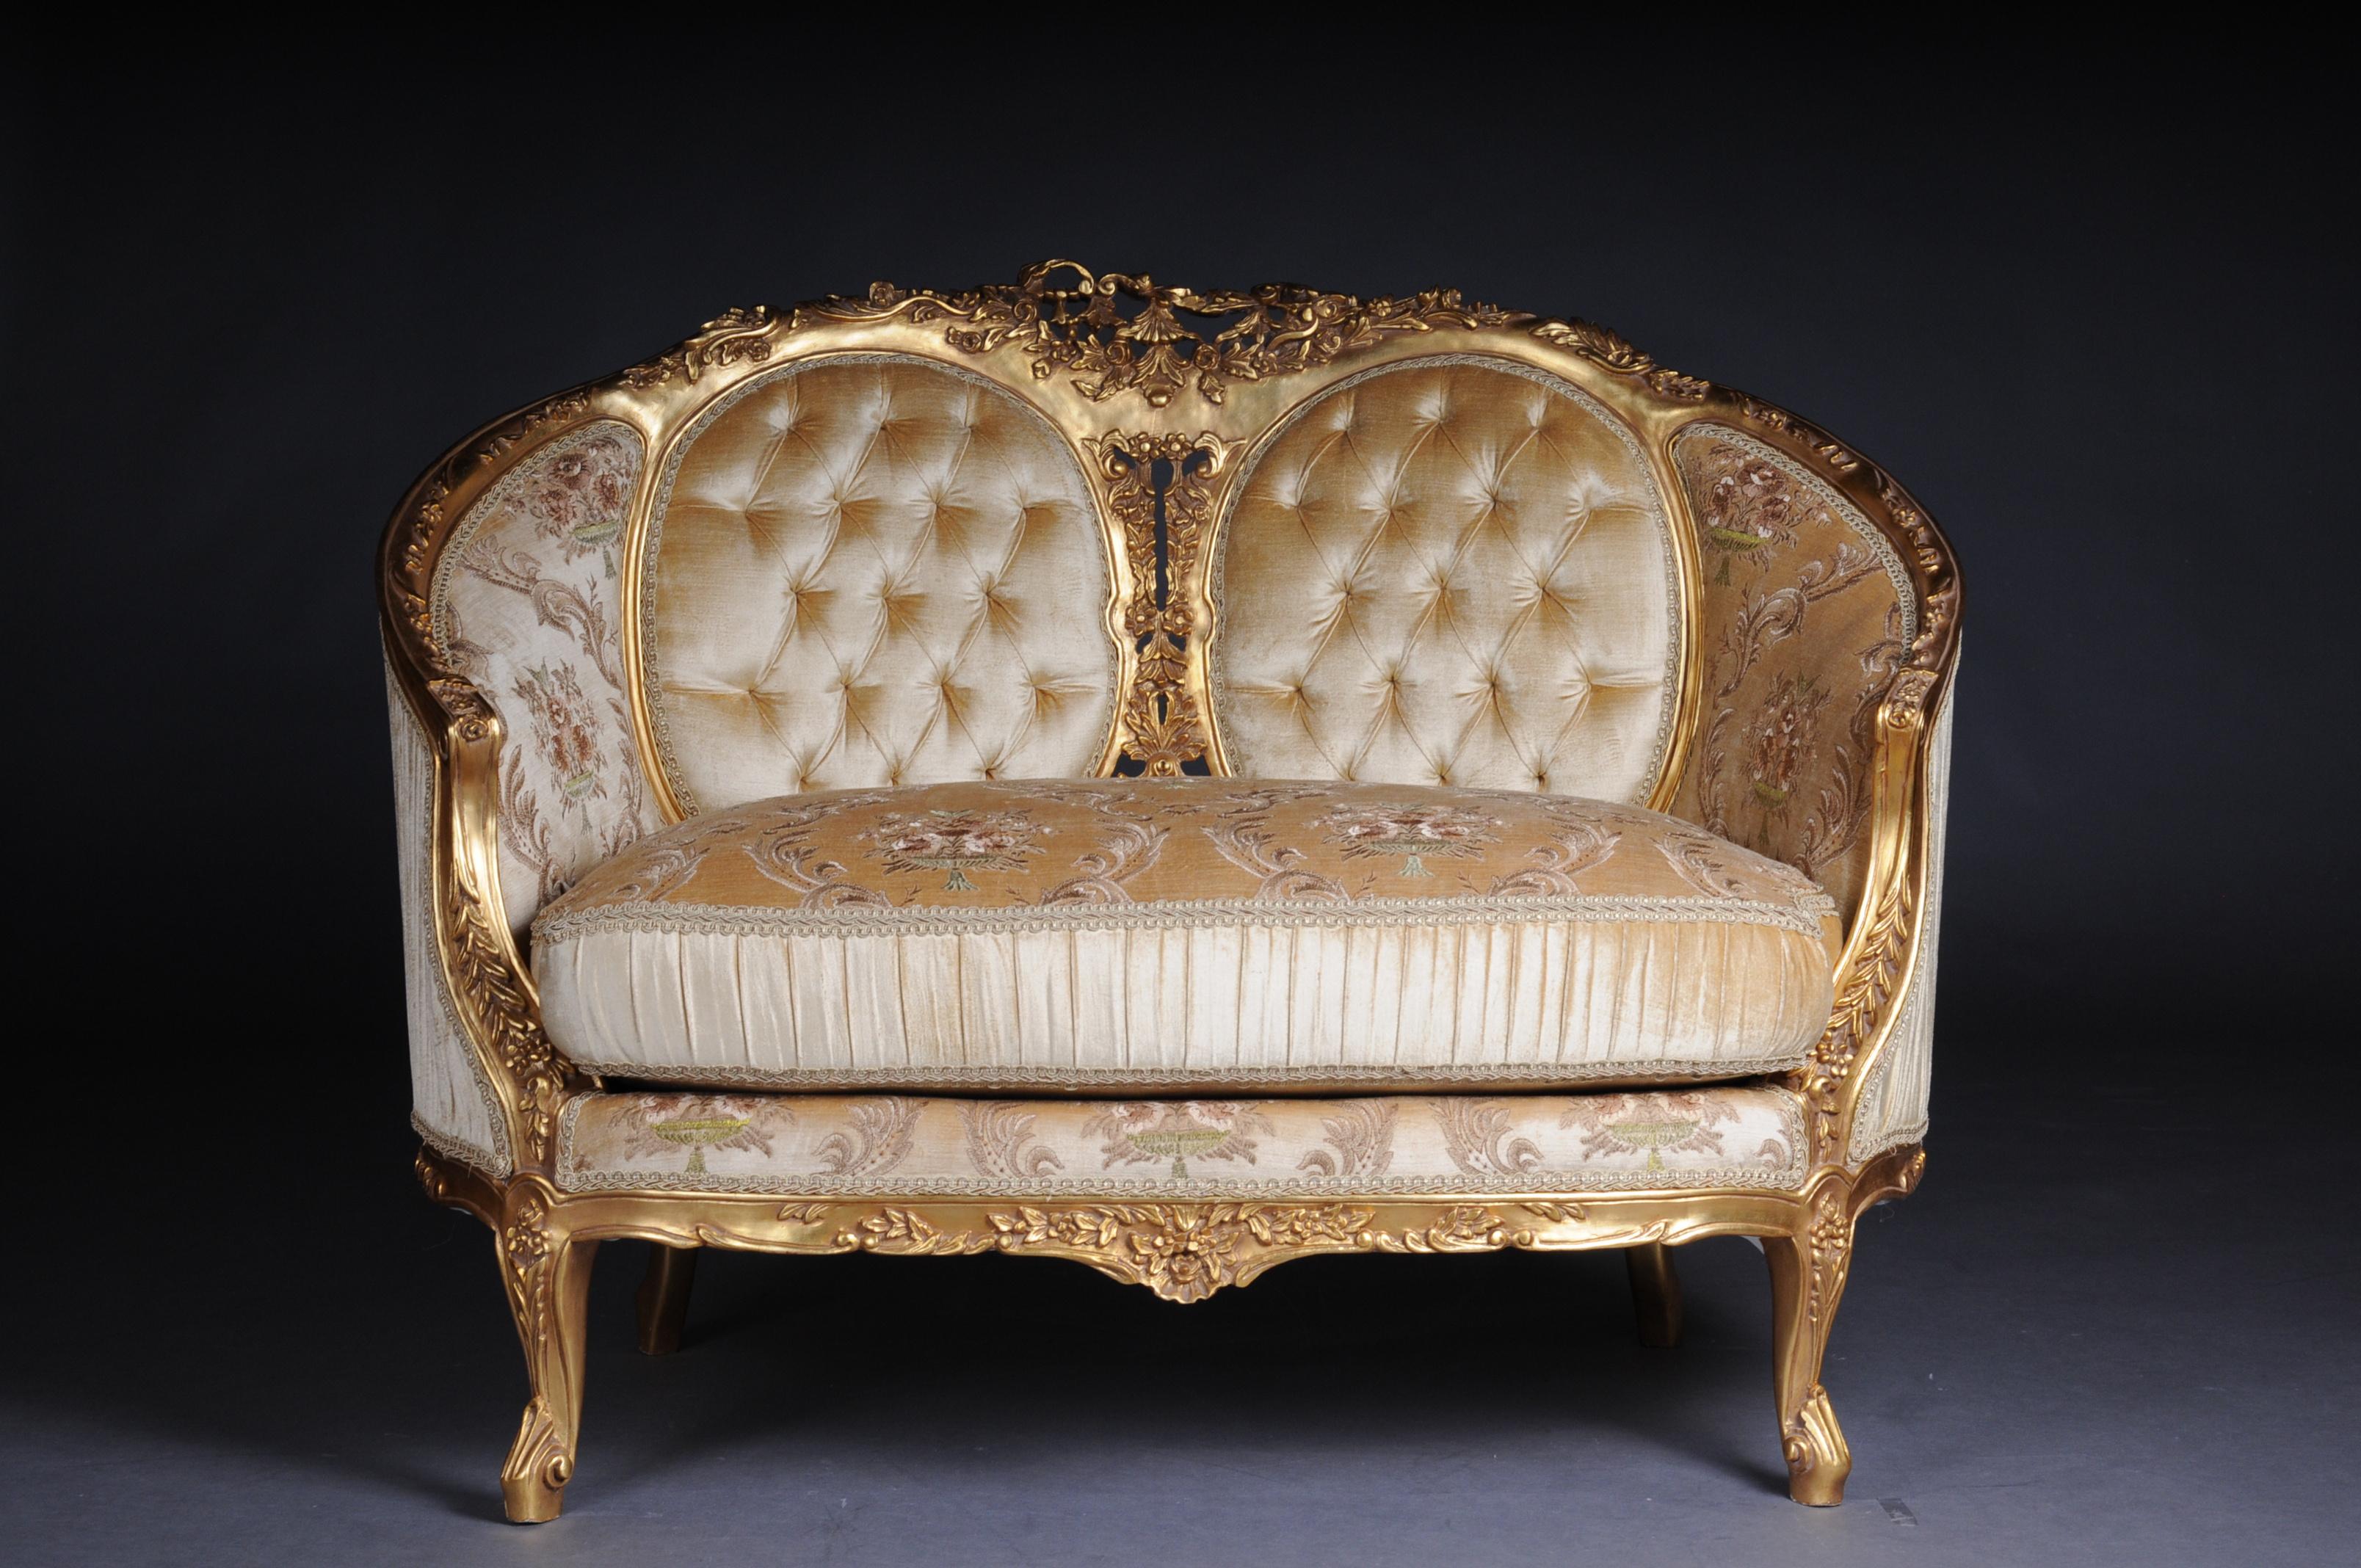 Hand-Carved French Sofa, Canapé, Couch in Rococo or Louis XV Style